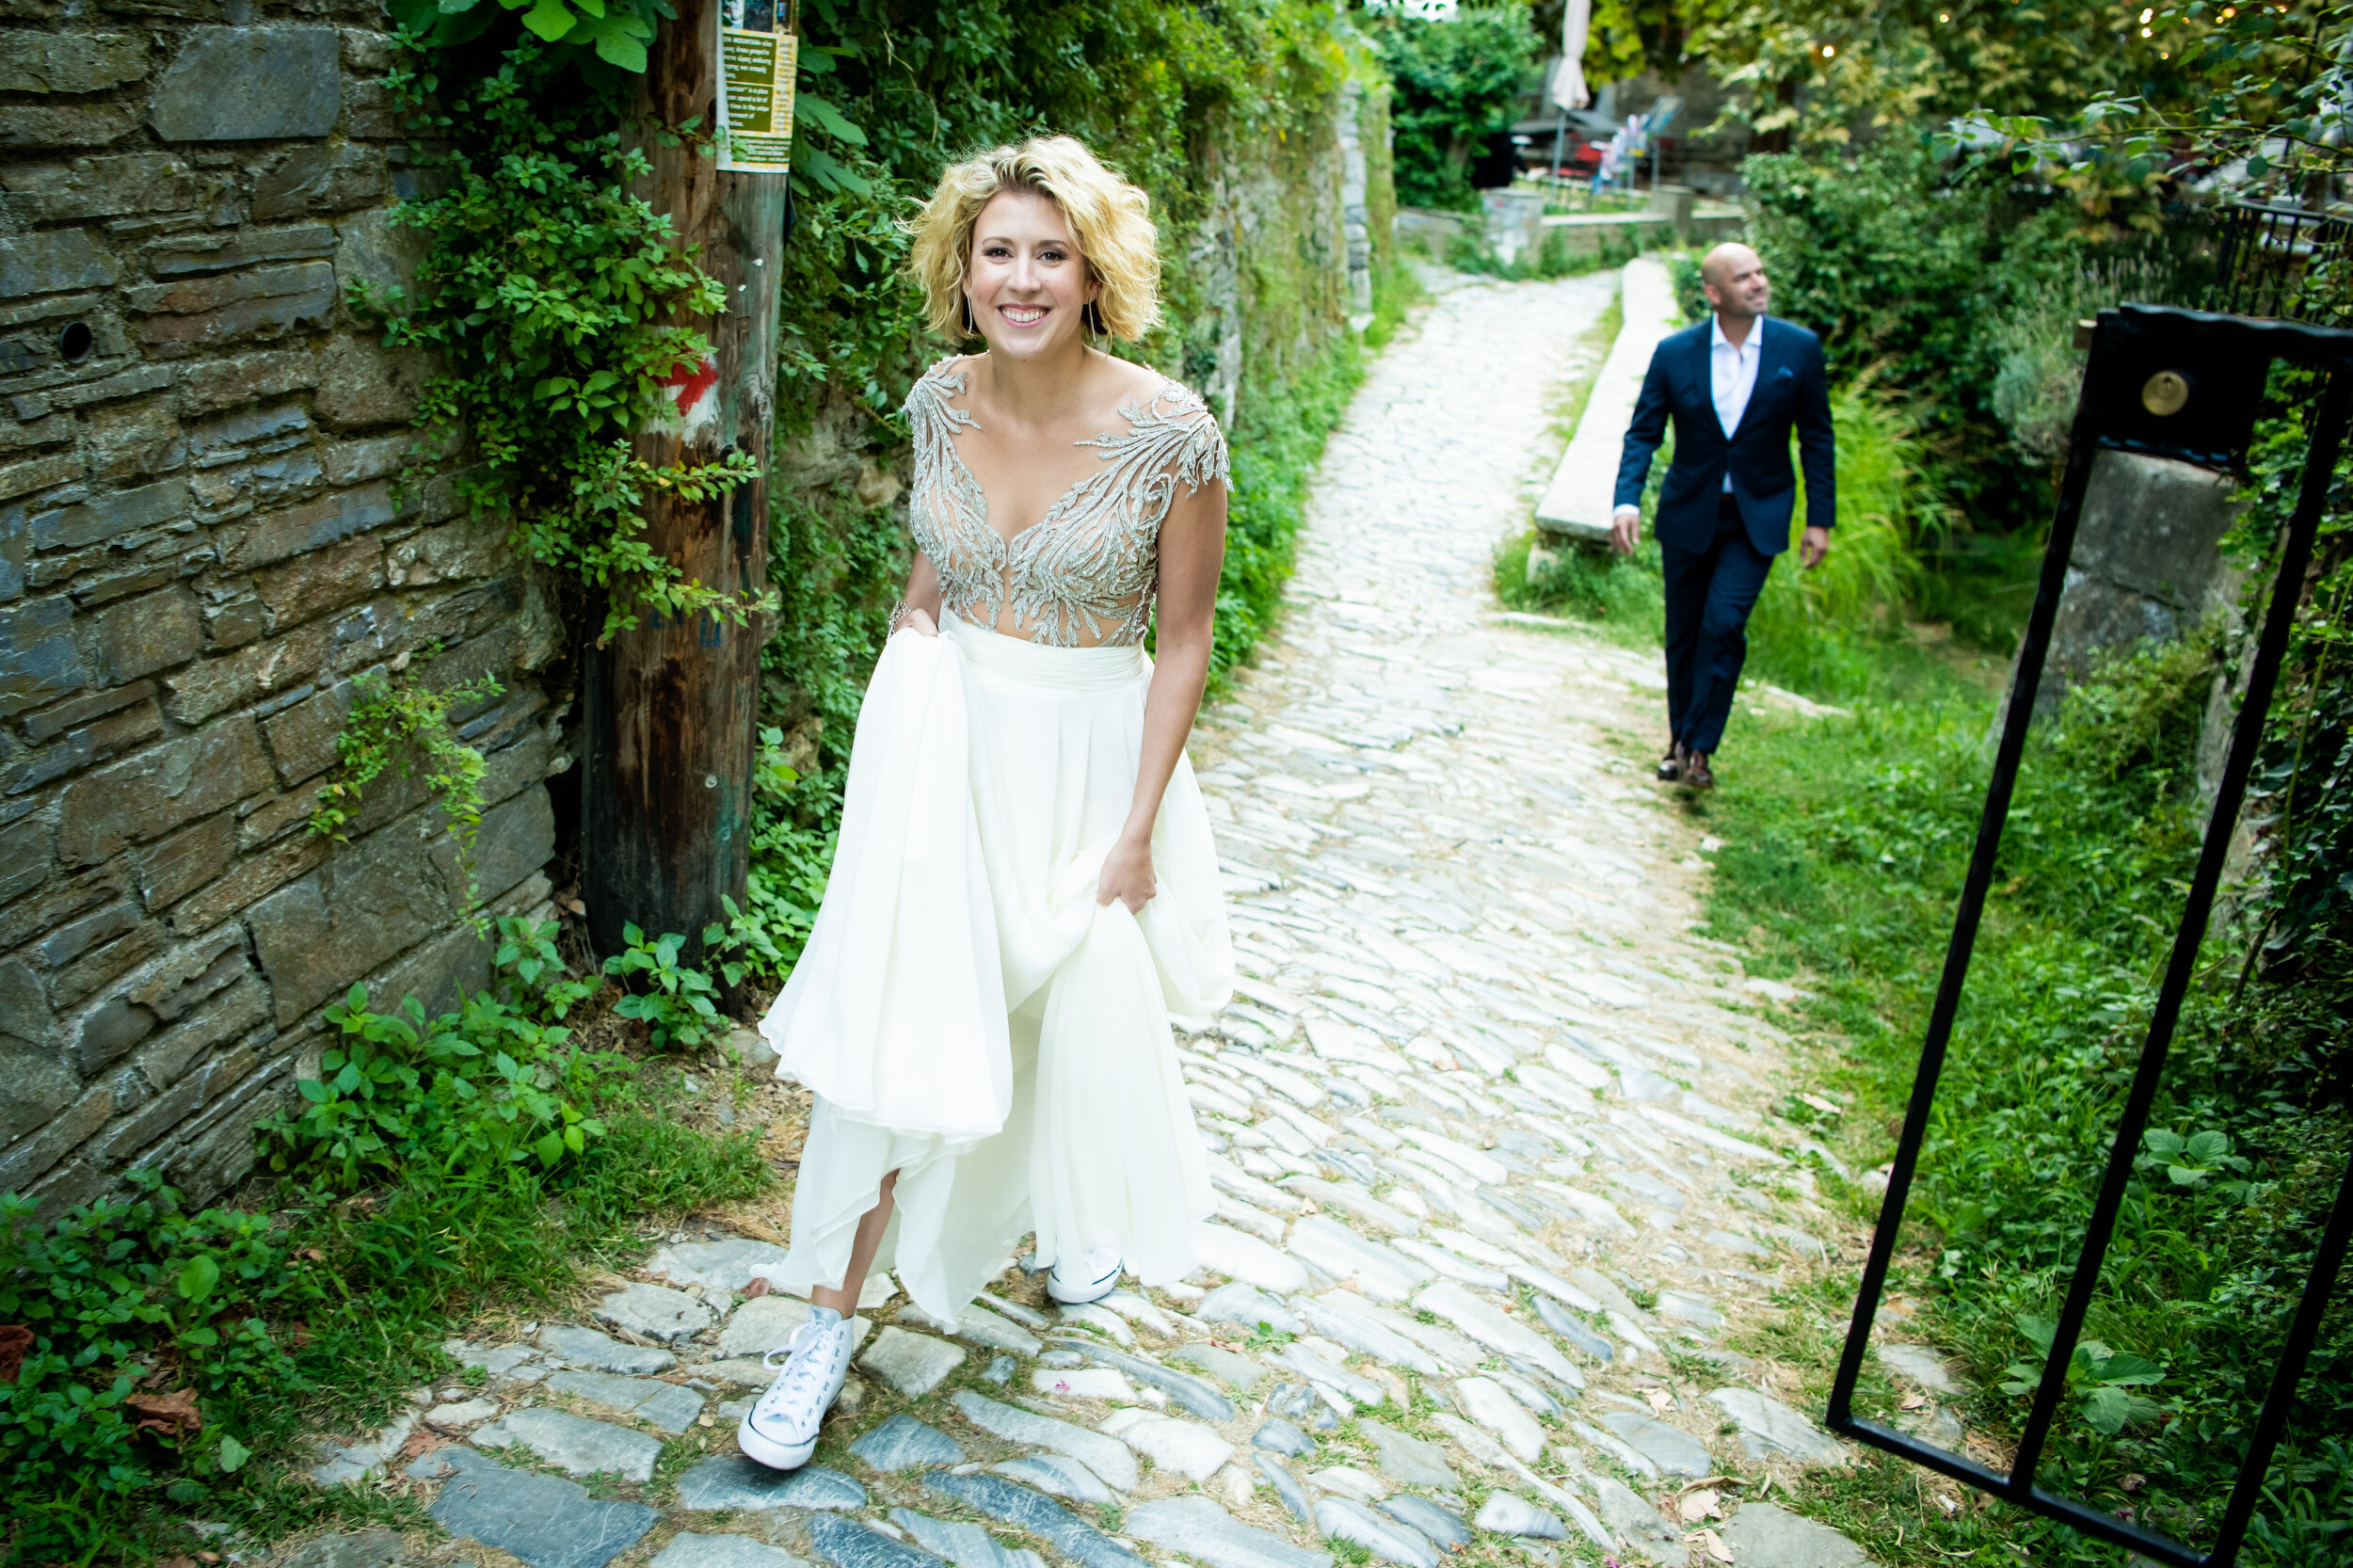 Bride and groom head to the reception on their wedding day: destination wedding photo at the Lost Unicorn Hotel, Tsagarada, Greece by J. Brown Photography.